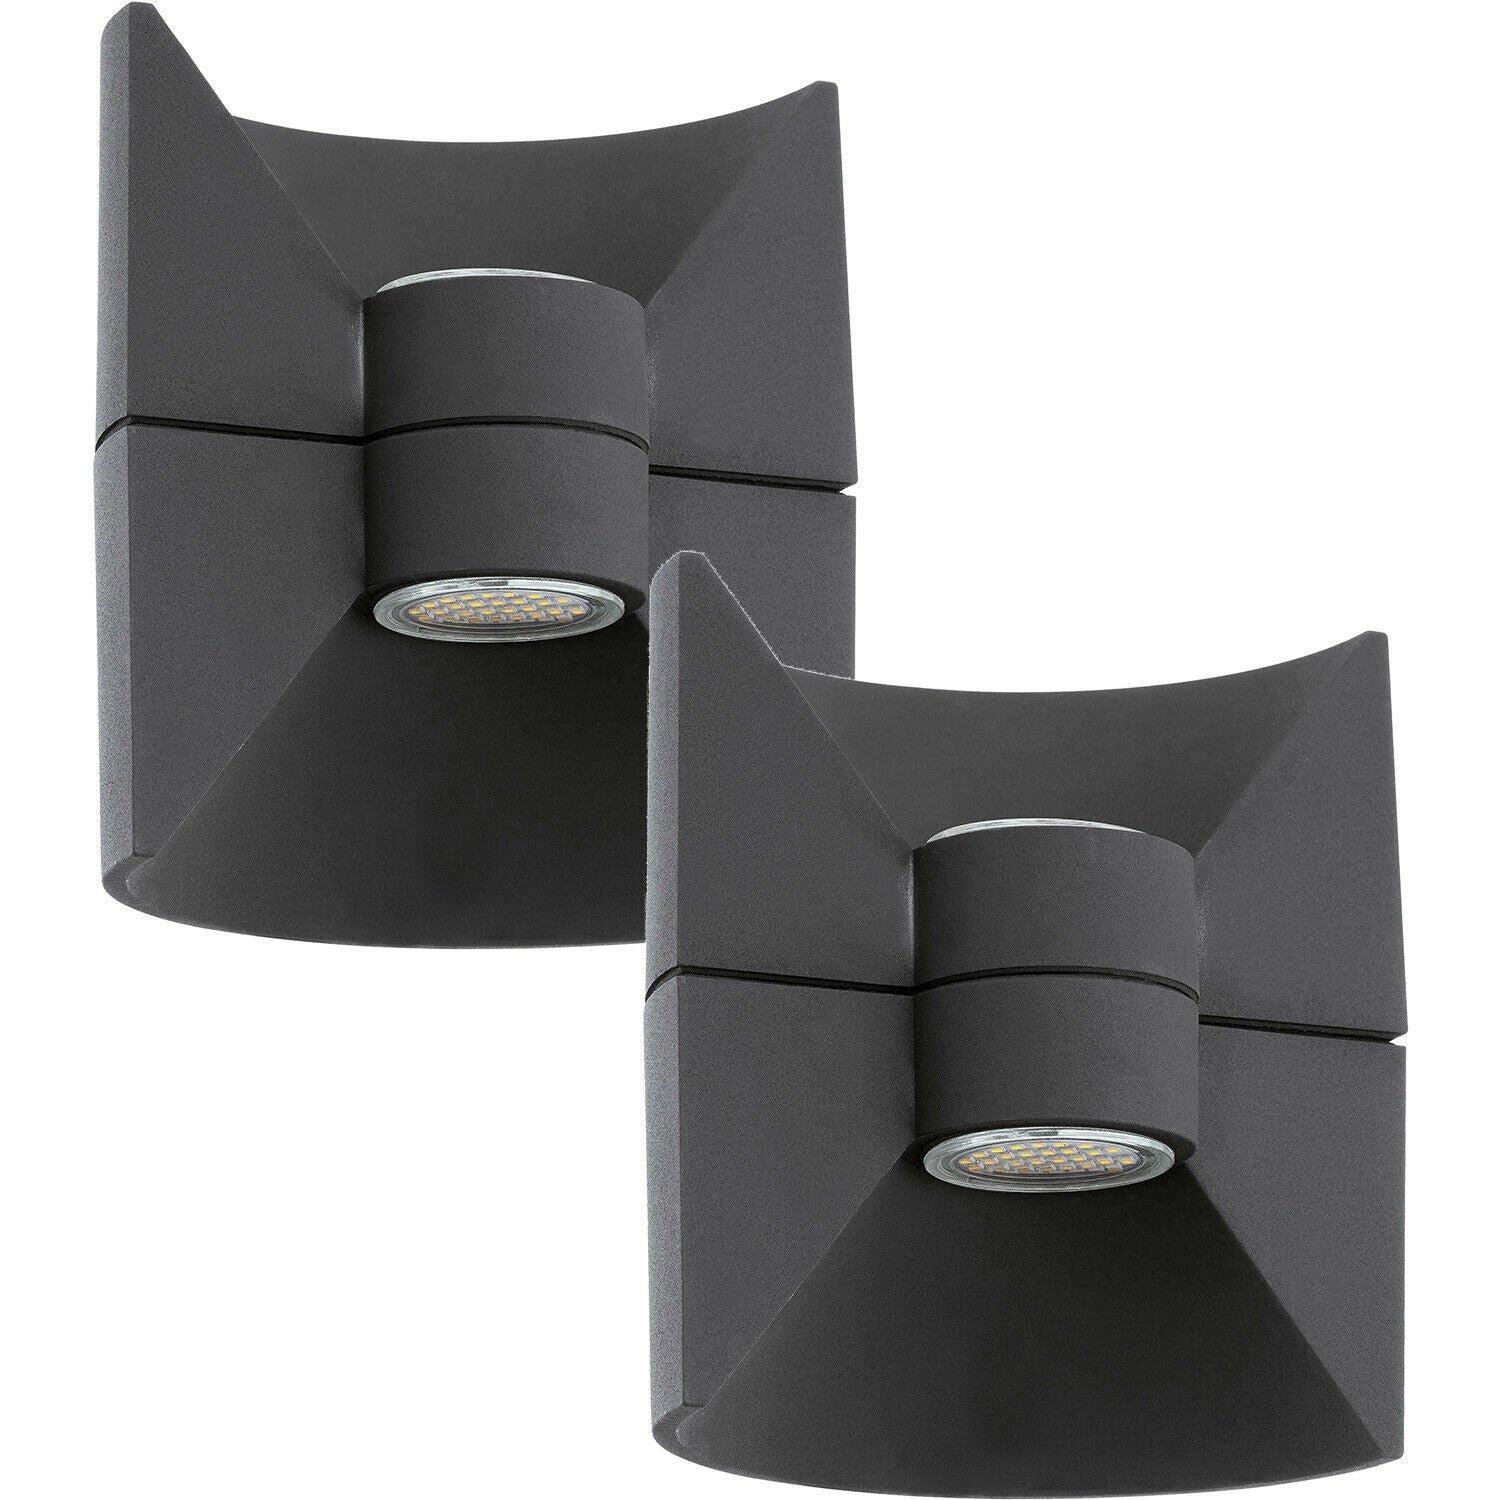 2 PACK IP44 Outdoor Up & Down Wall Light Anthracite Aluminium 2.5W LED Lamp